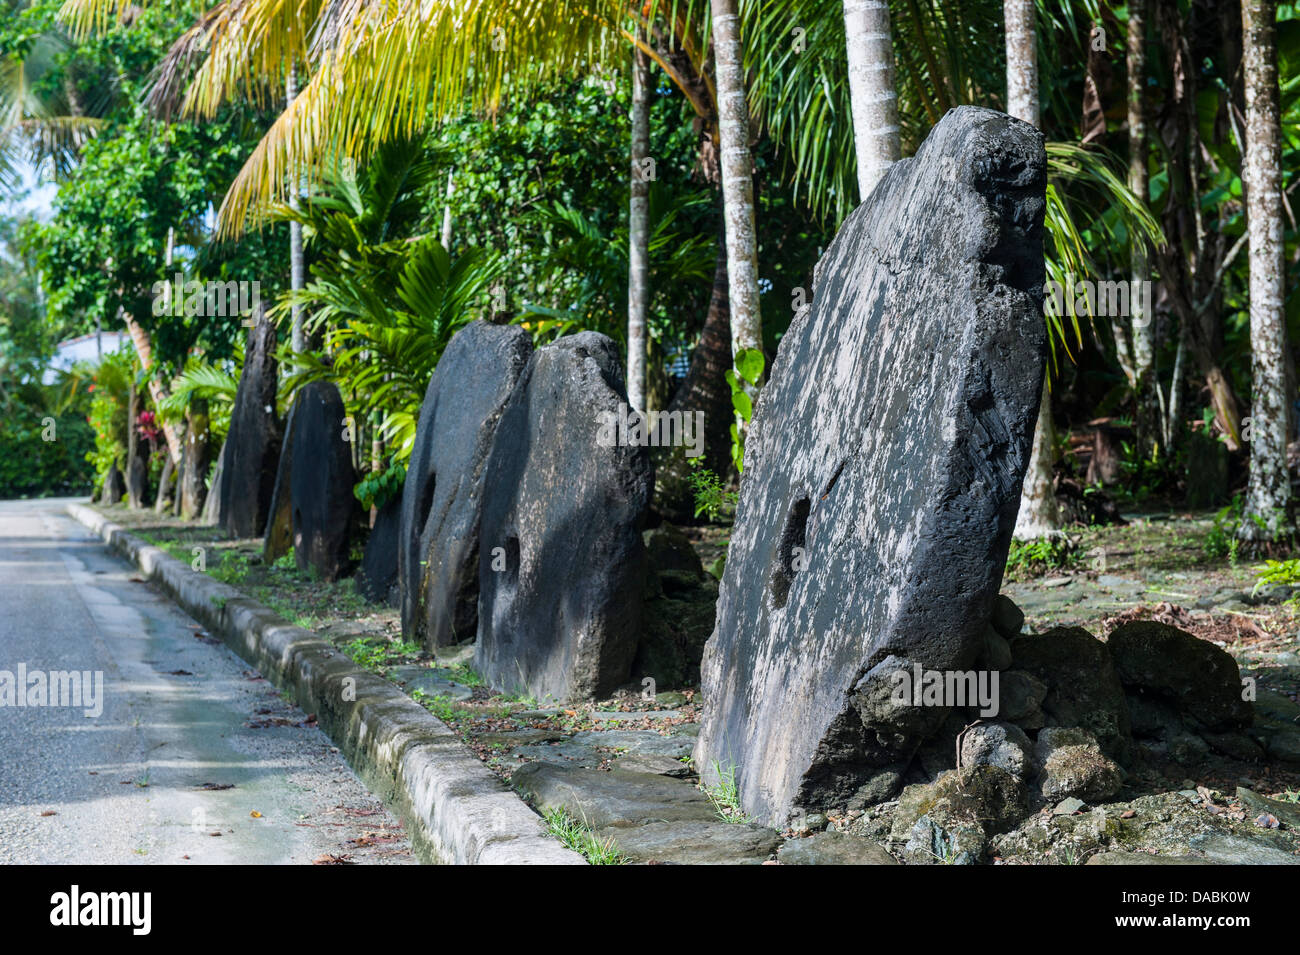 Stone money on the island of Yap, Federated States of Micronesia, Caroline Islands, Pacific Stock Photo